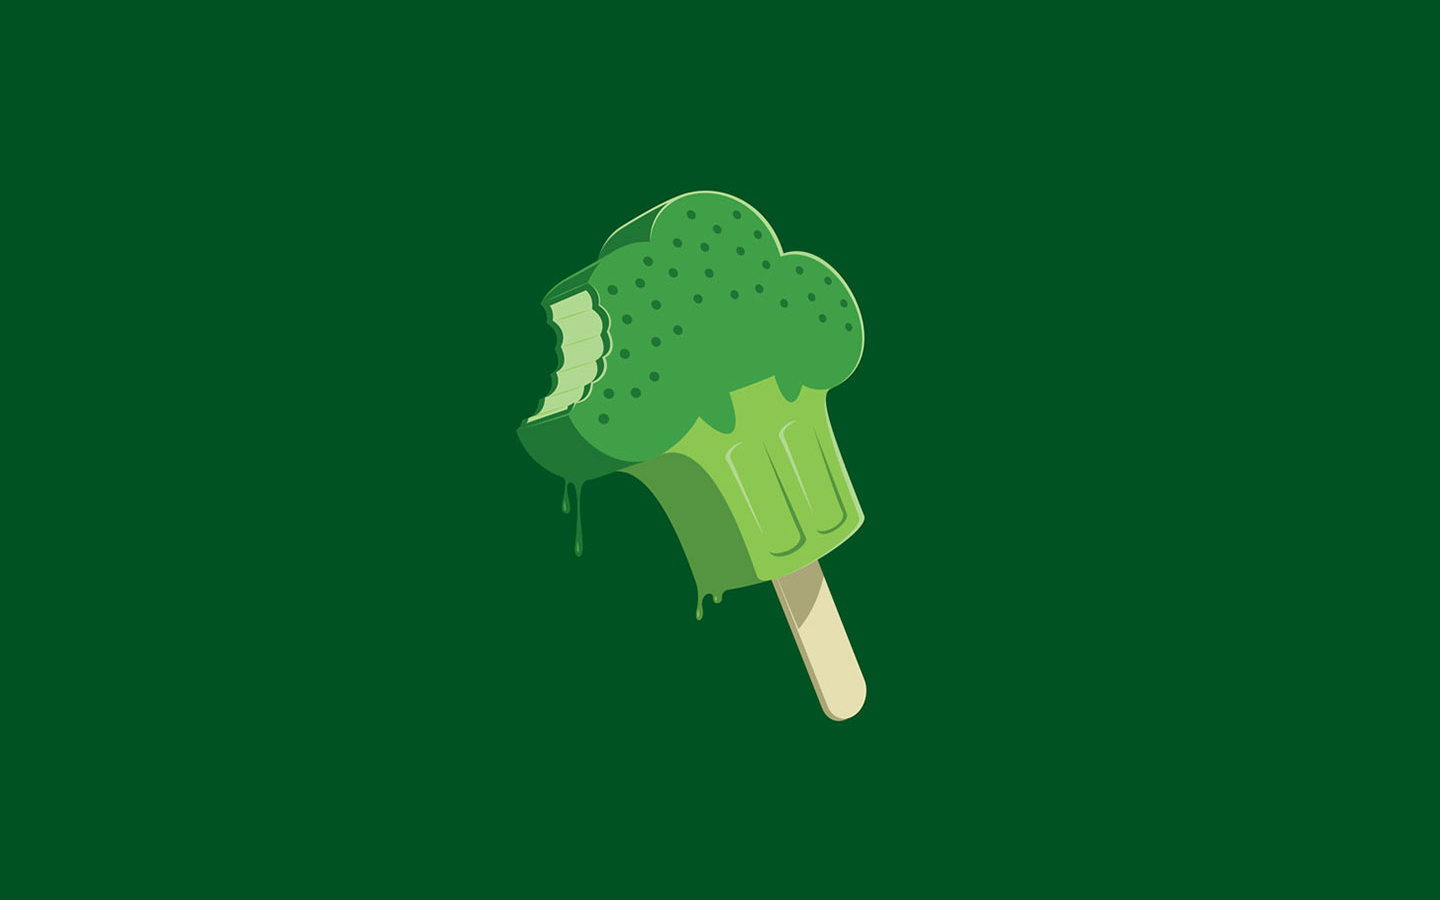 General 1440x900 minimalism green popsicle green background simple background food sweets artwork